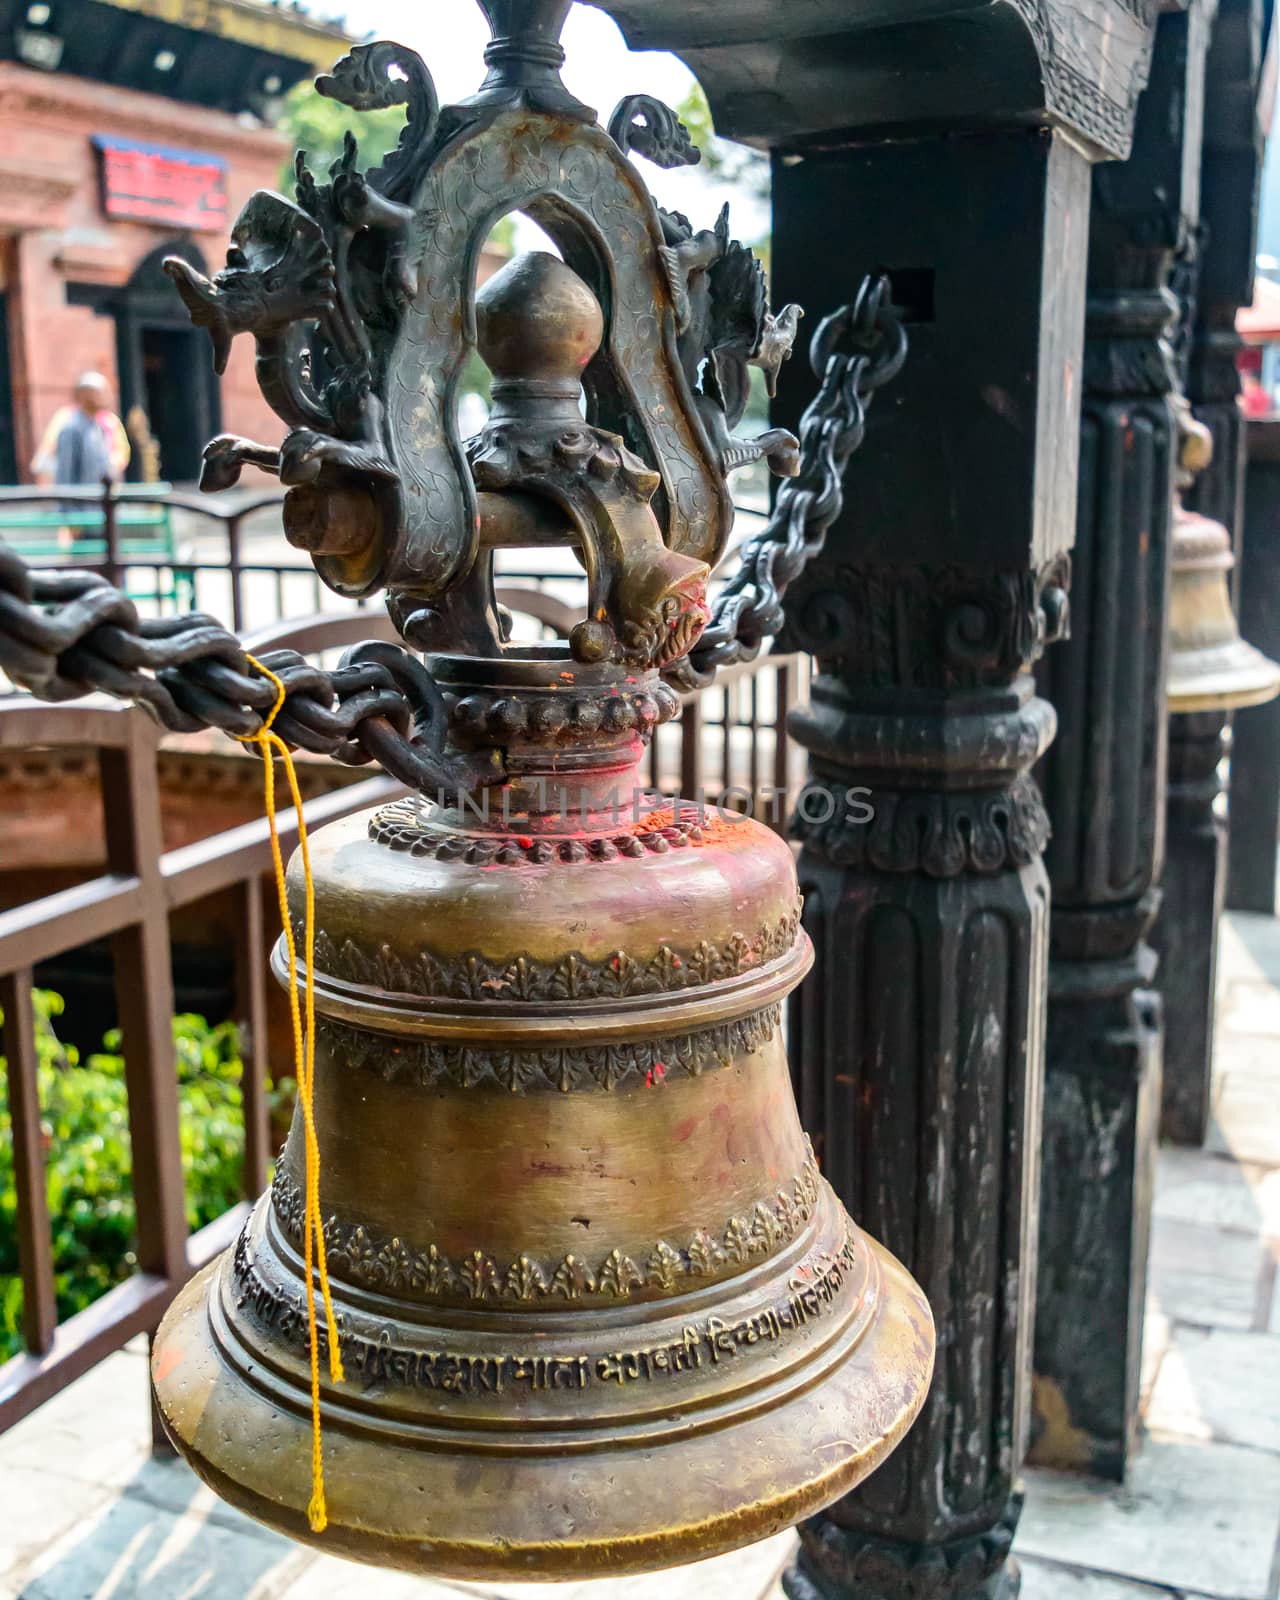 In Hinduism, bells are generally hung at the temple dome in front of the Garbhagriha. Generally, devotees ring the bell while entering into the sanctum. It is said that by ringing the bell, the devotee informs the deity of his/her arrival. The sound of the bell is considered auspicious which welcomes divinity and dispels evil. by sudiptabhowmick